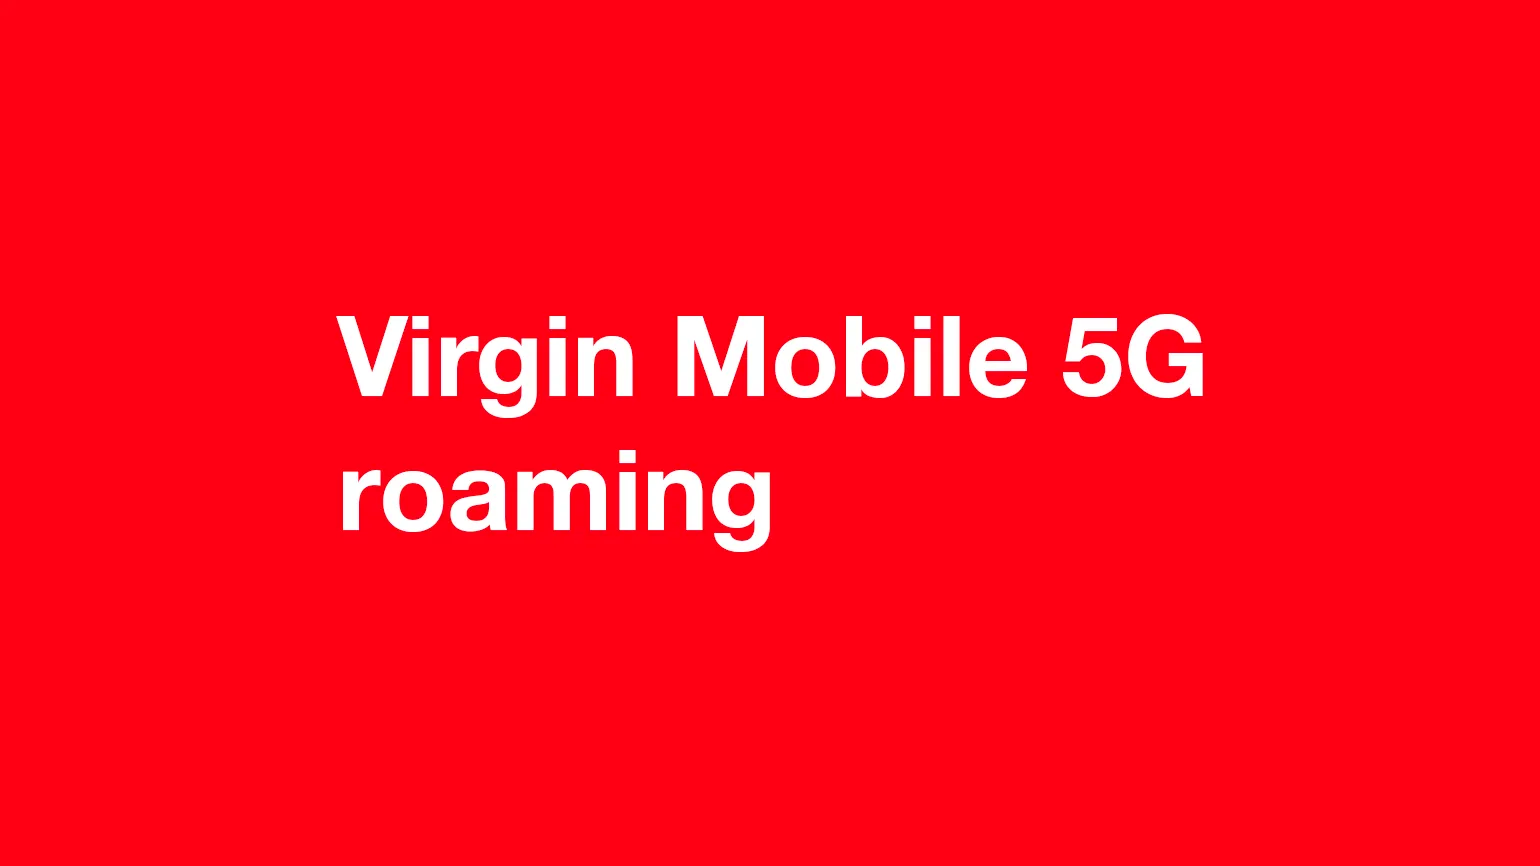 Can I get 5G when roaming with Virgin Mobile?